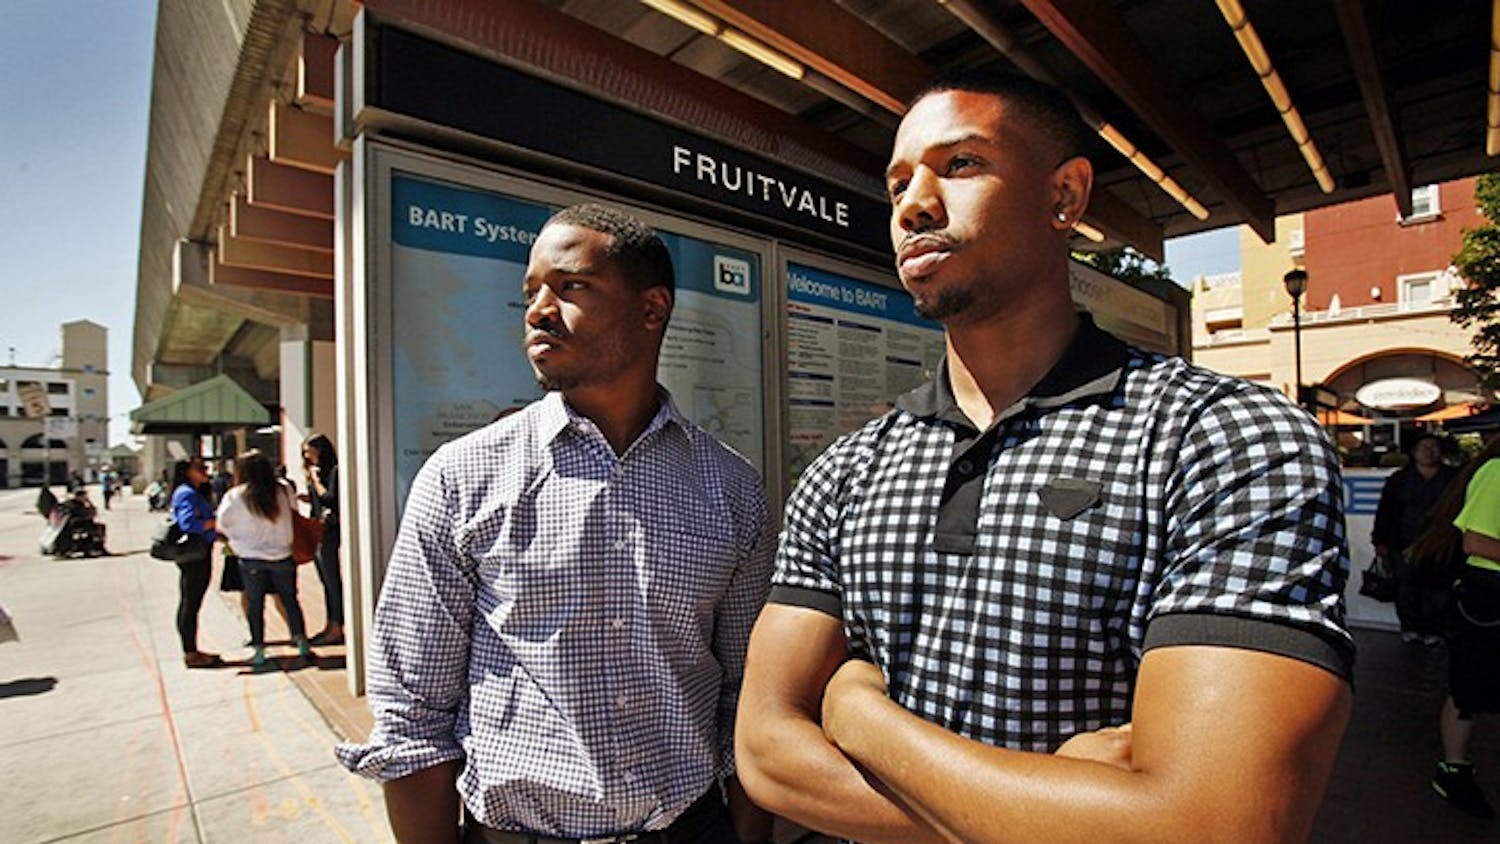 Director Ryan Coogler, left, and actor Michael B. Jordan of the film &quot;Fruitvale Station&quot; stand at the same-named BART stop in Oakland, California, on June 20, 2013. The movie is based on the events in 2009 where Oscar Grant III died in police custody. (Al Seib/Los Angeles Times/MCT)